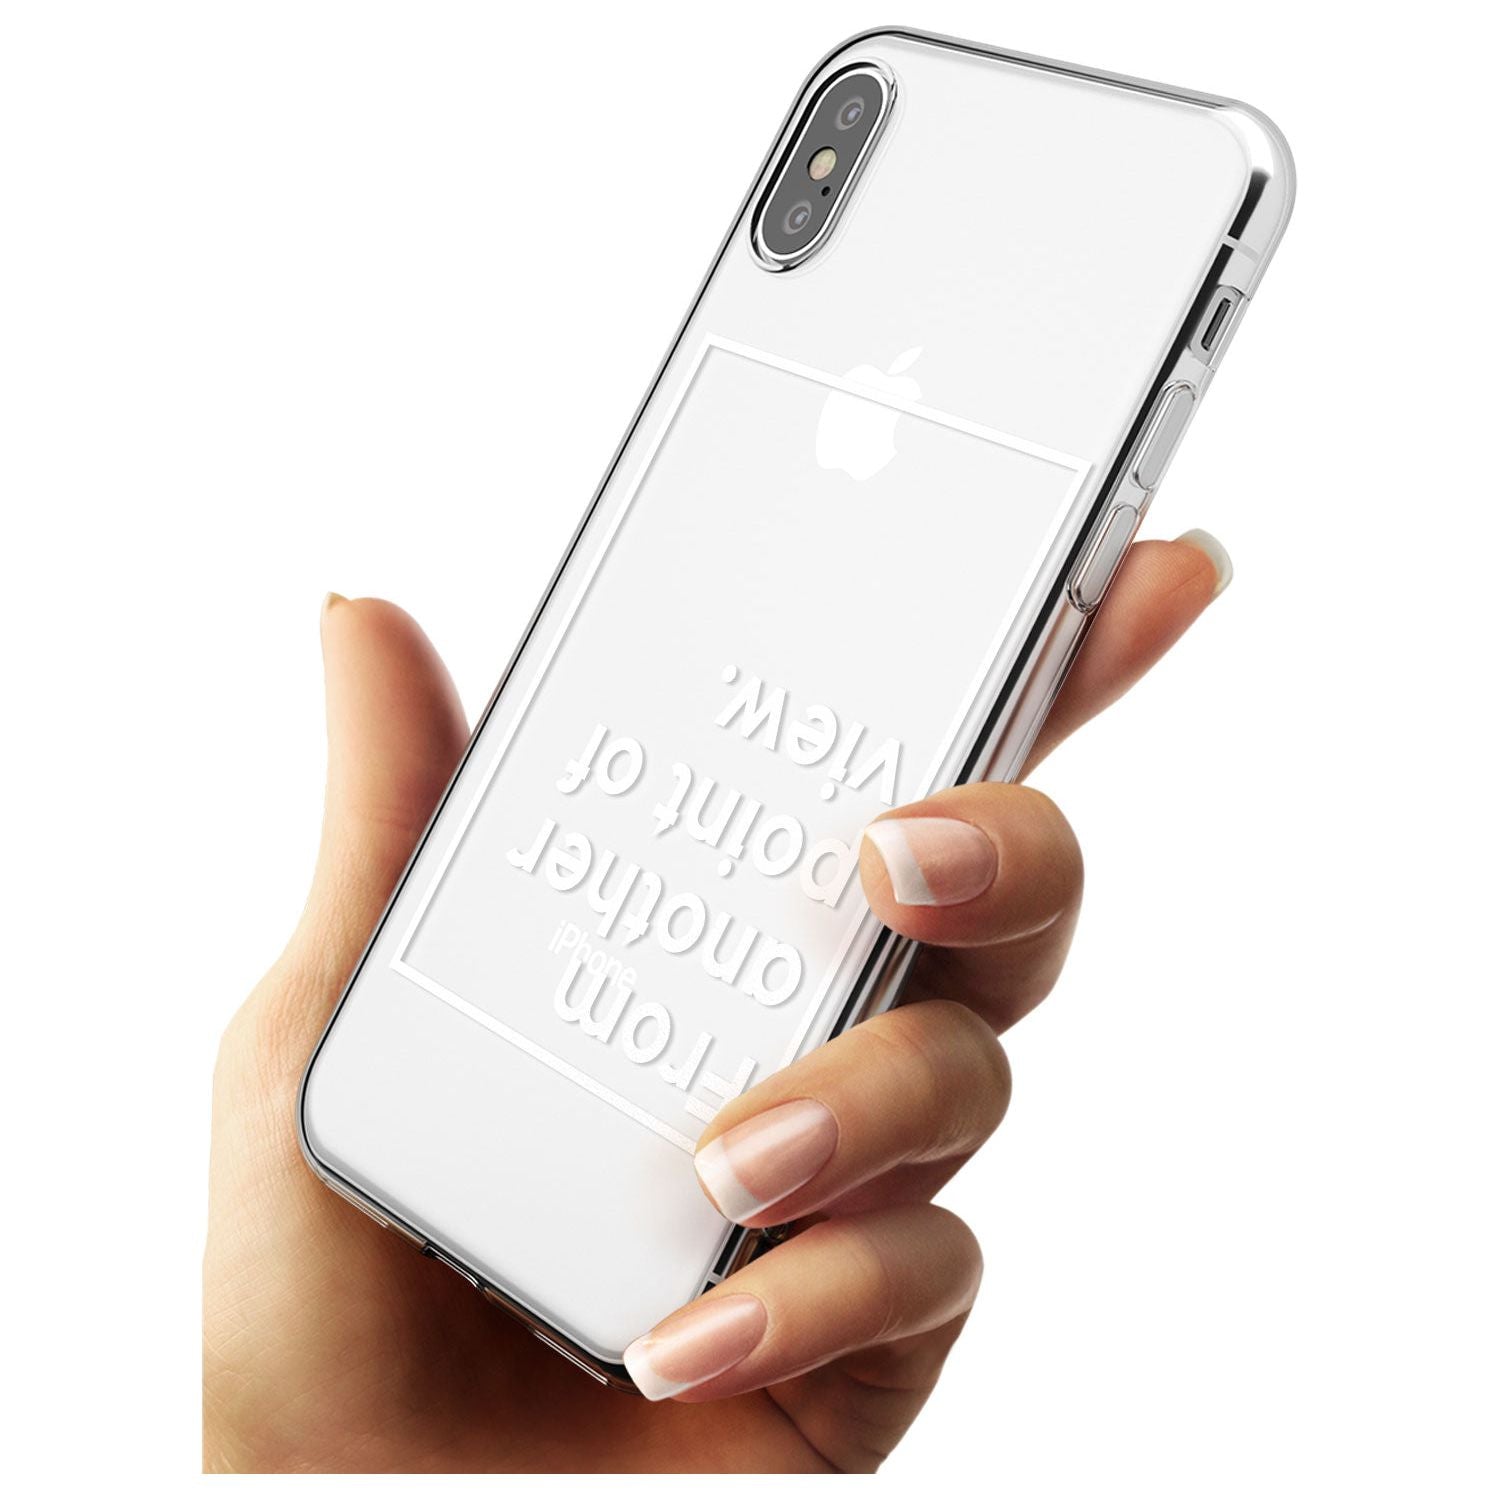 Another Point of View (White) Black Impact Phone Case for iPhone X XS Max XR